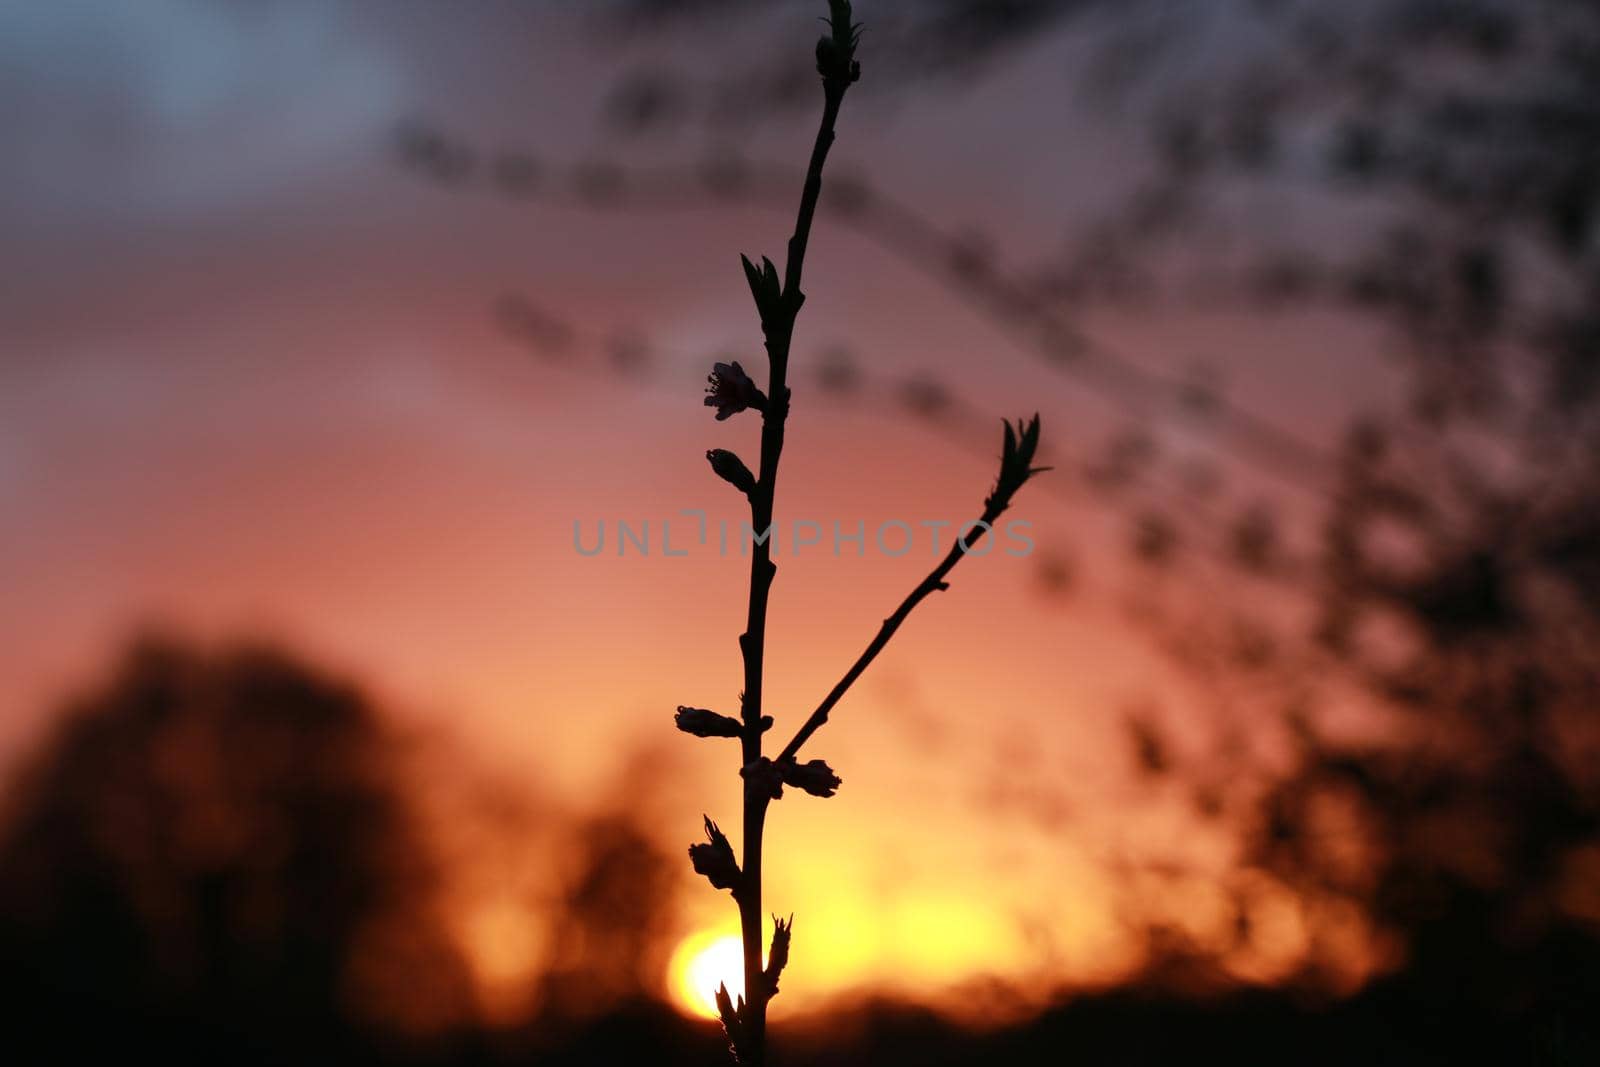 Small peach tree in front of a colourful sunset